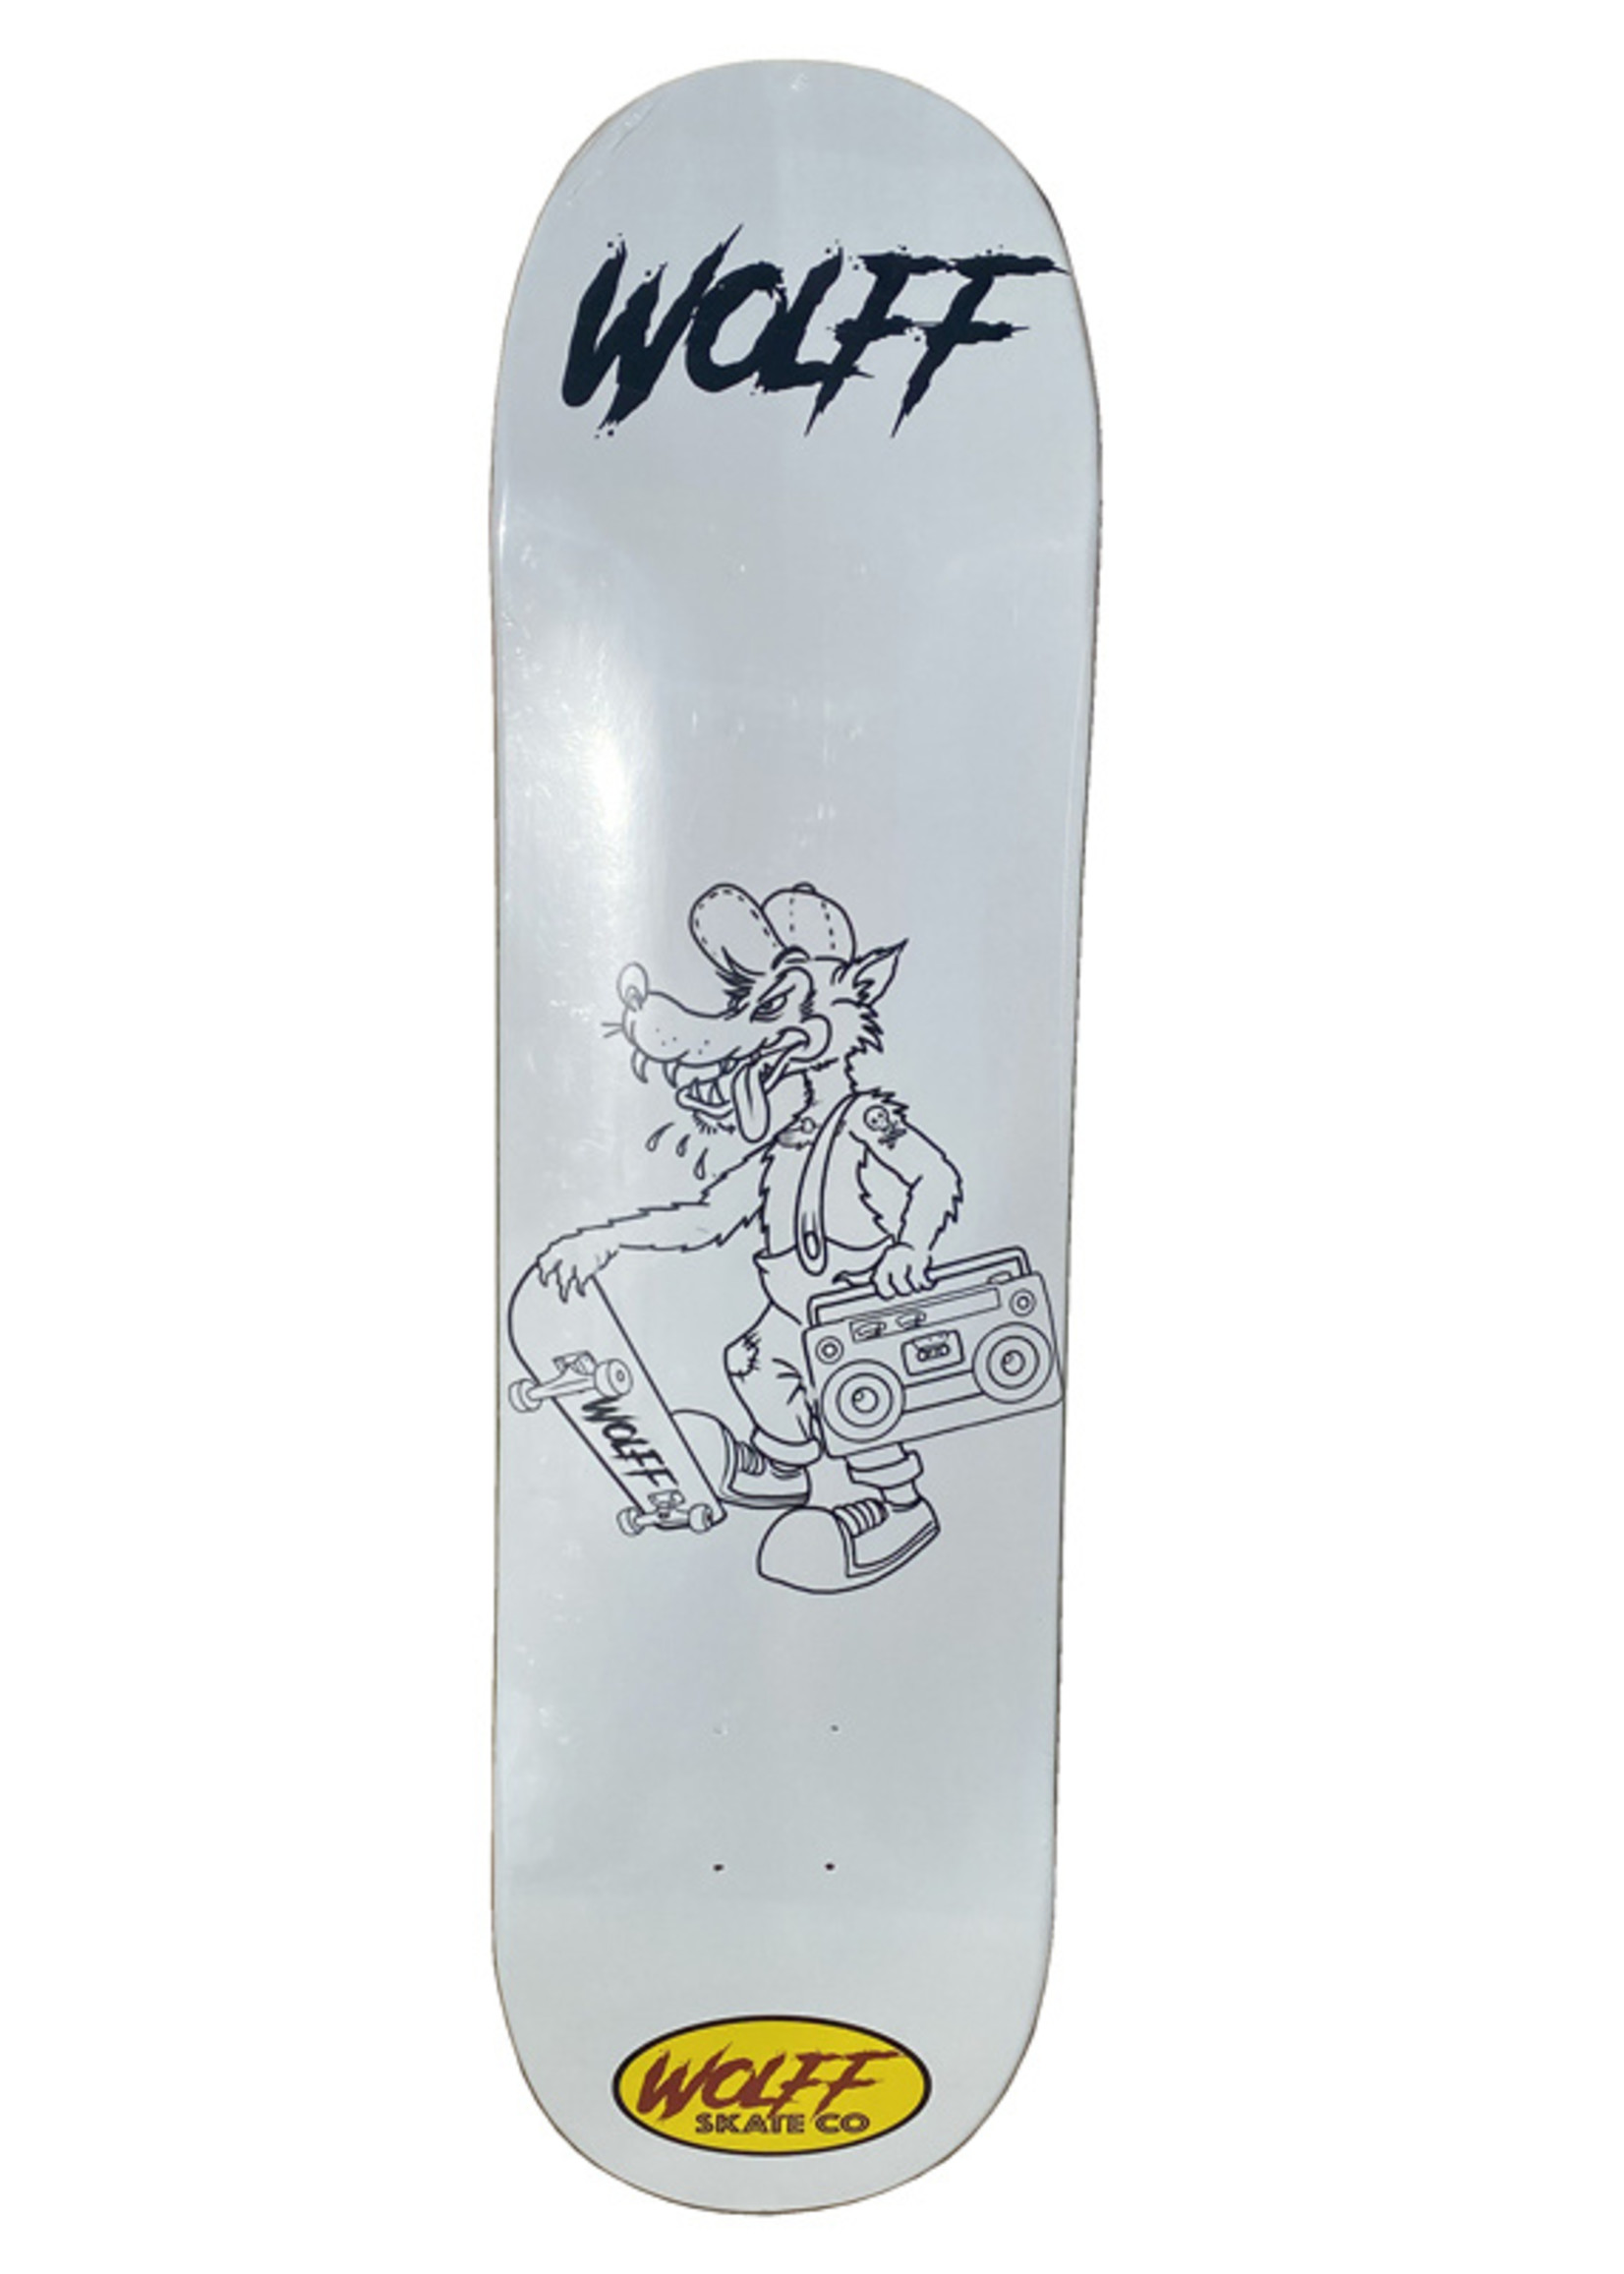 Wolff Skate Co. Wolff Skate Co. 8.25"